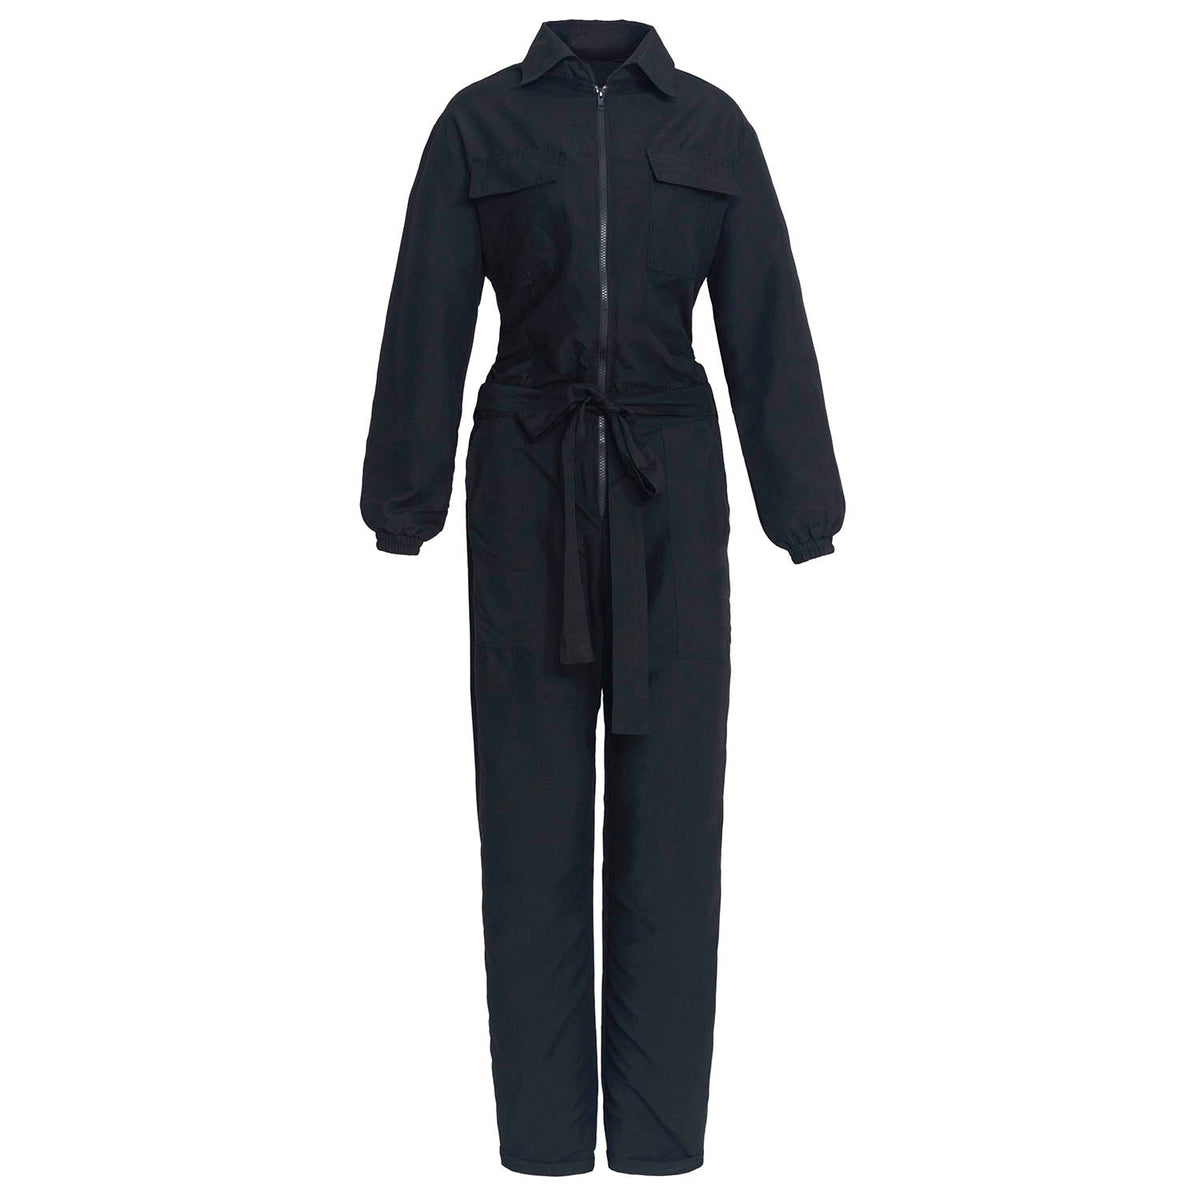 Our cool and casual Amelia Jumpsuit in black with its relaxed style is designed for the perfect traveling or outdoor occasion. Complete with a spread collar, tie waist, and front utility pockets, this chic jumpsuit offers a simple yet stylish look.